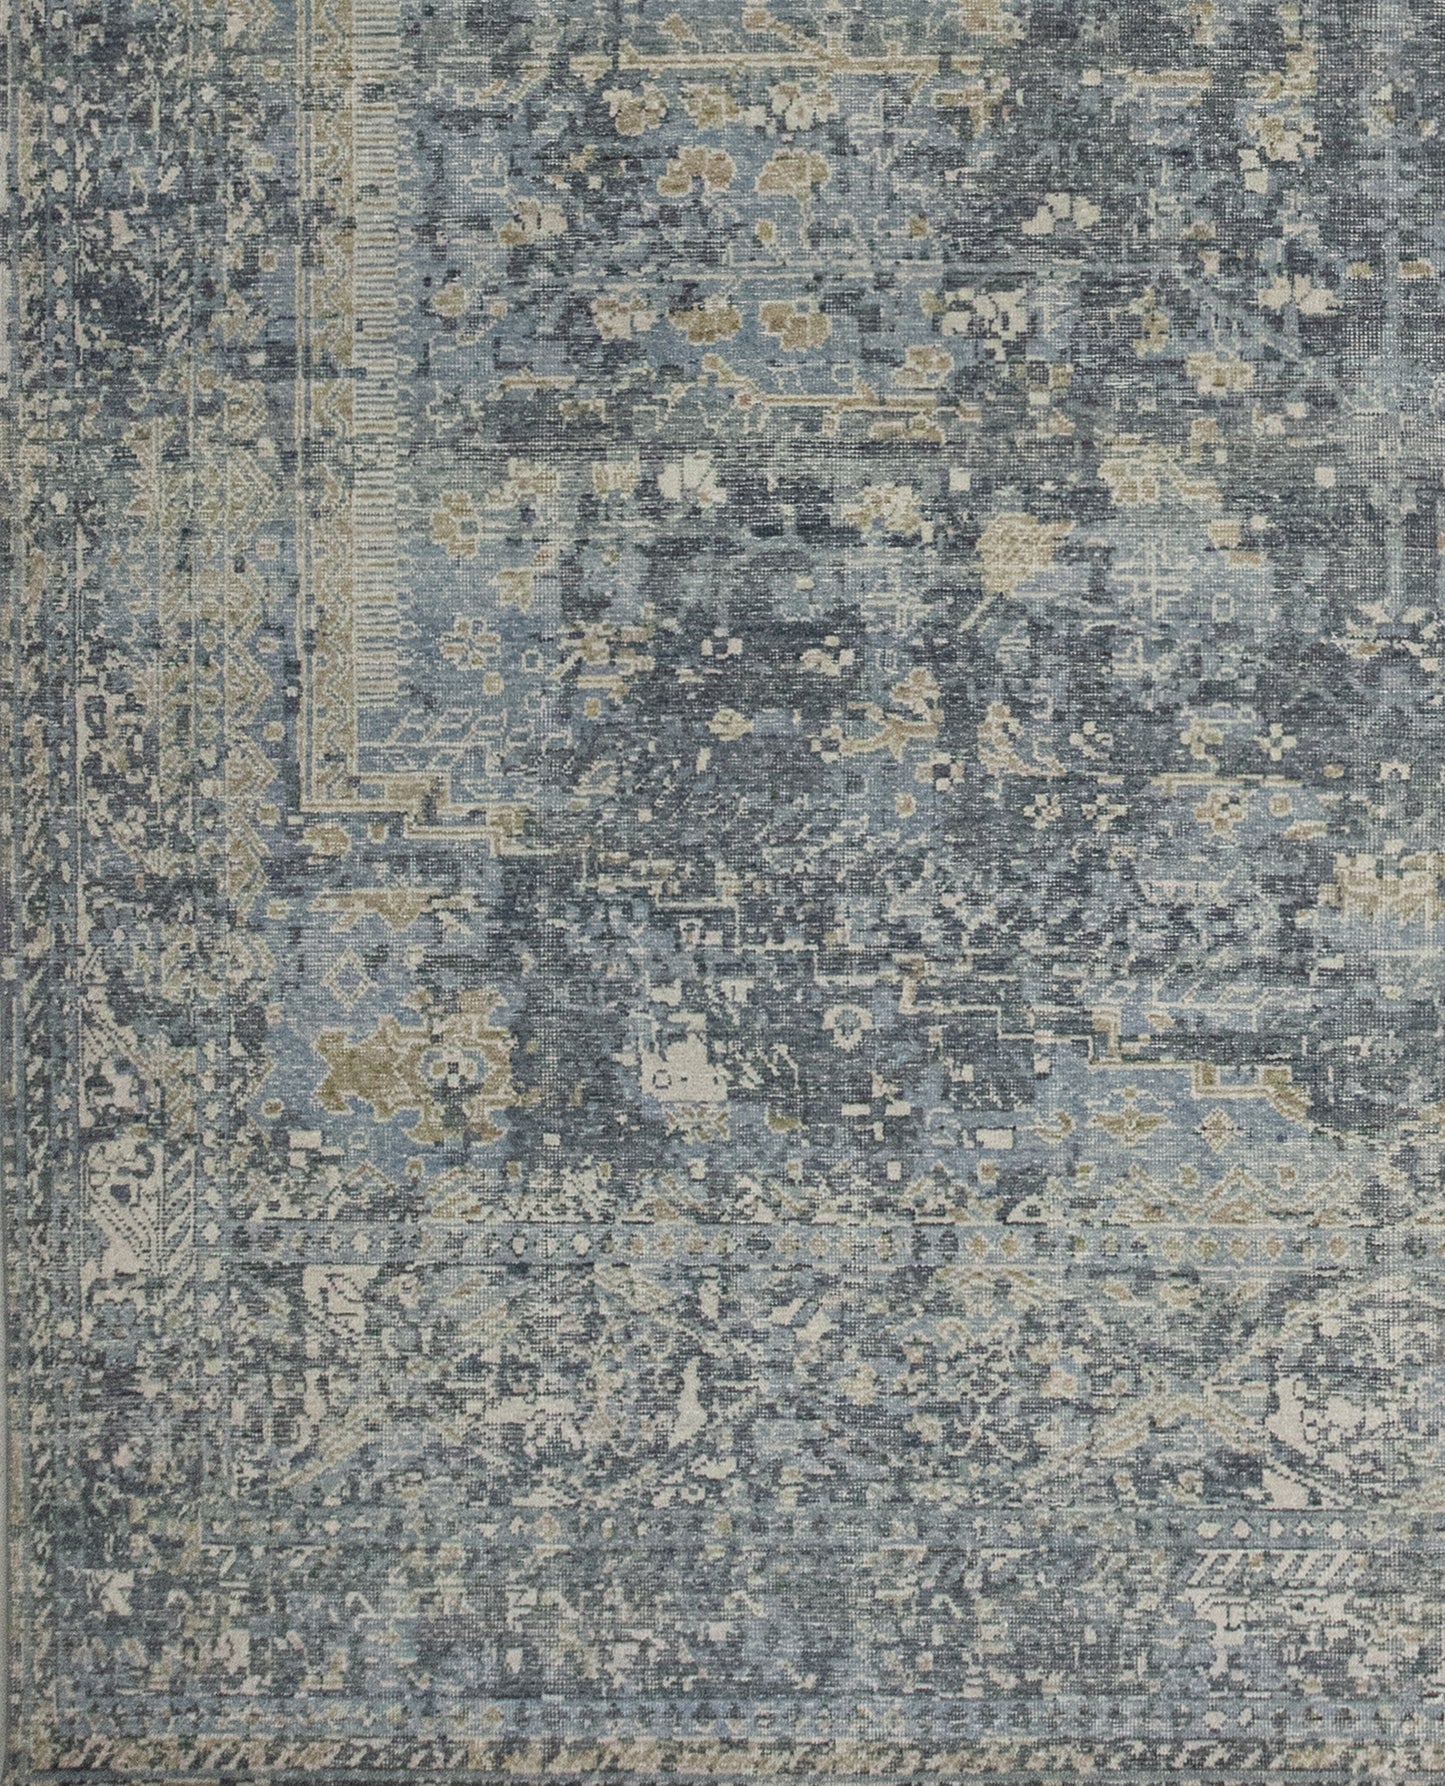 From the left bottom corner to all the contour, there are multiple borders which is a representative feature of vintage carpets. 